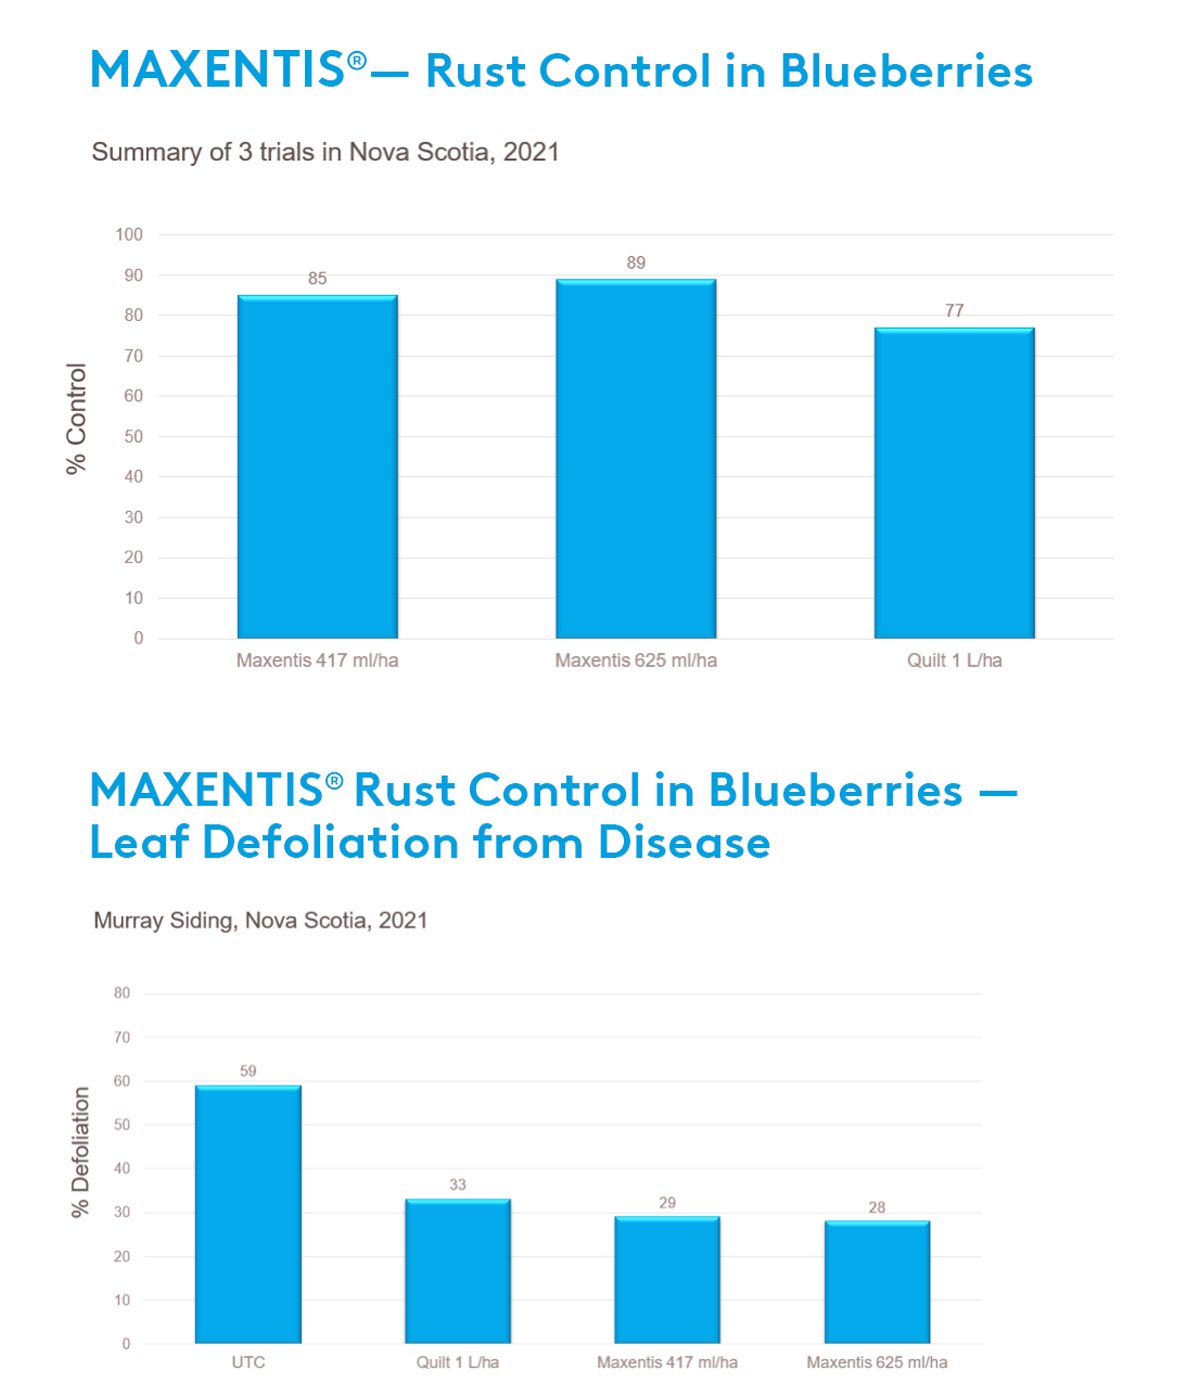 ADAMA Maxentis rust control in blueberries chart